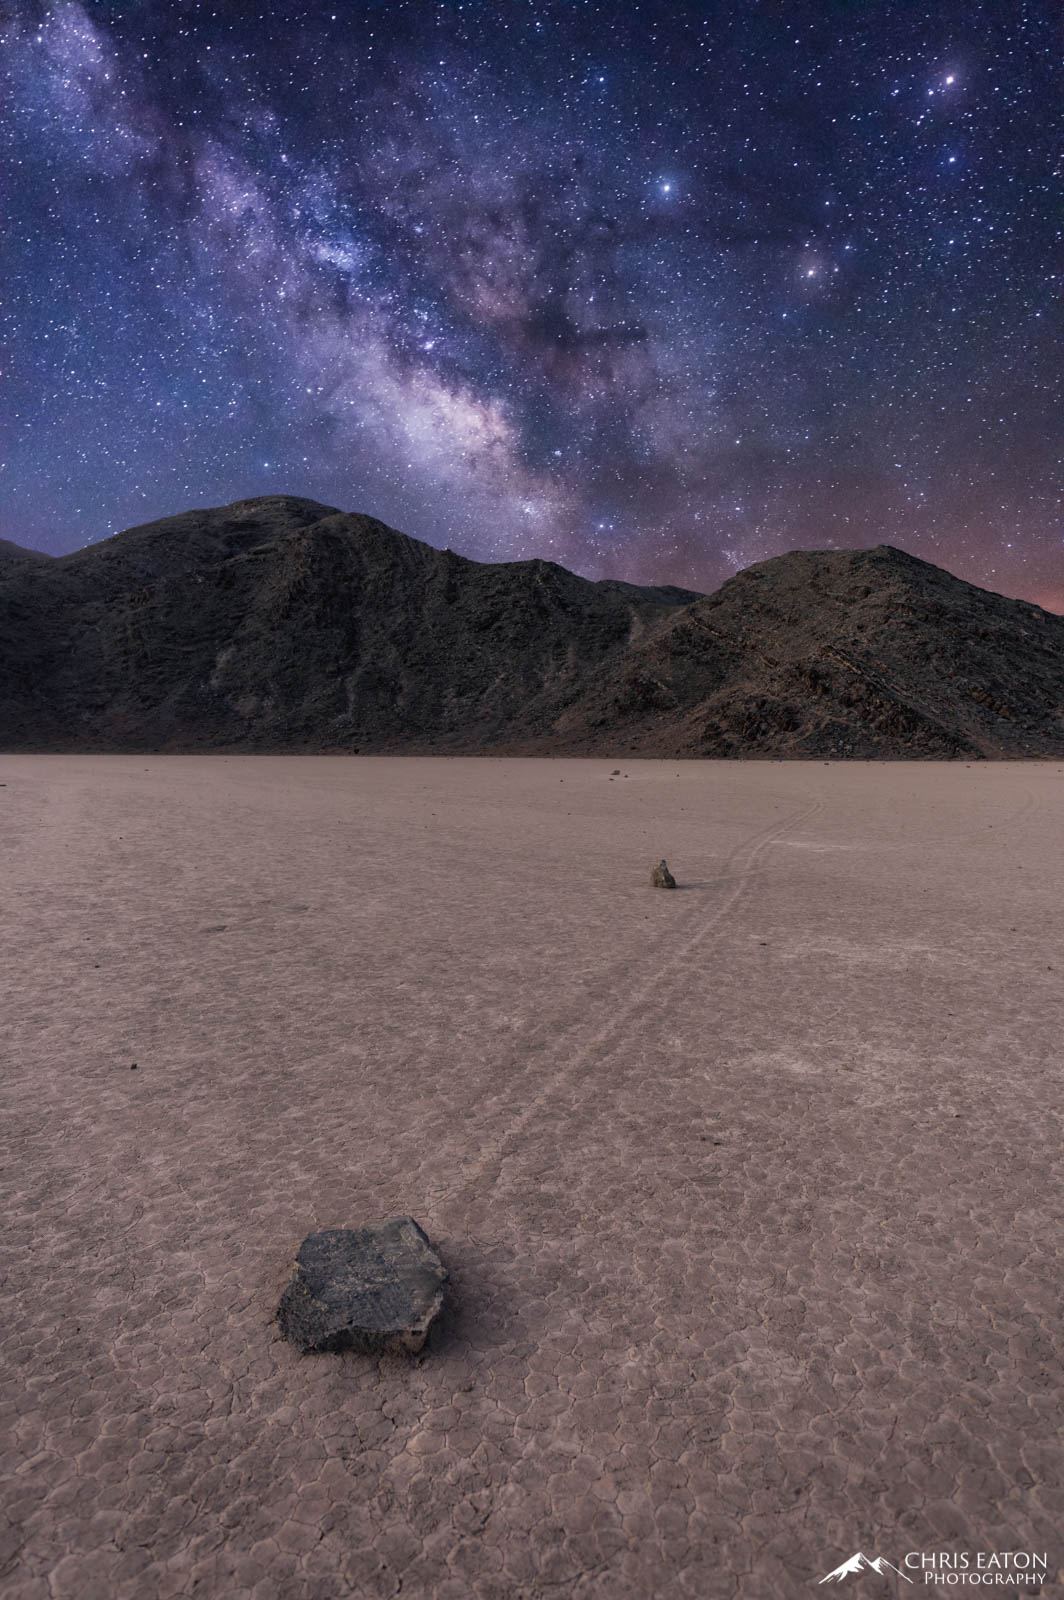 The Milky Way galaxy rises over a sailing stone at Racetrack Playa in Death Valley National Park.